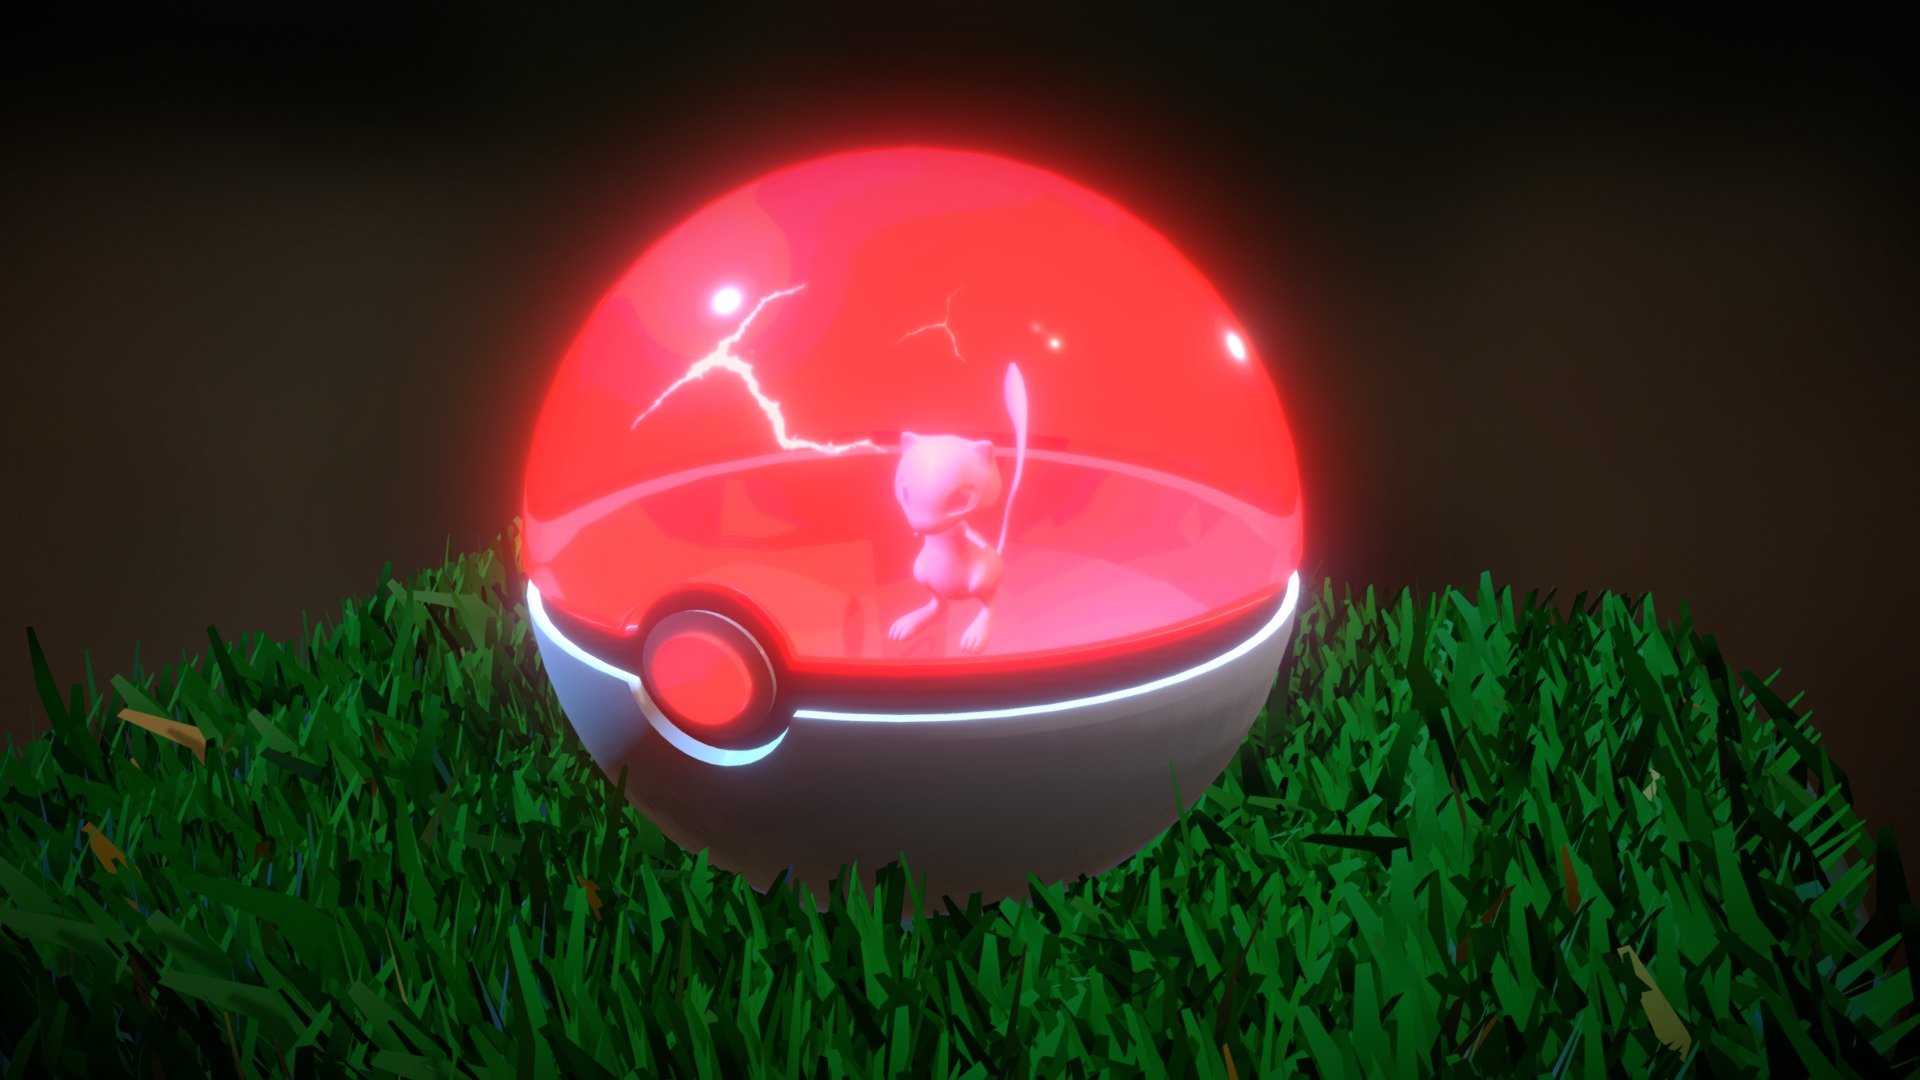 My pokeball with the Mew inside.
I made this animation of Mew trying away out of the pokeball.
All the 3D modeling I've made on Maya 2018.
The texture of Mew was made on Photoshop.
 - Pokemon - Pokeball feat. Mew (Animated) - 3D model by E.Rodrigo 3d model